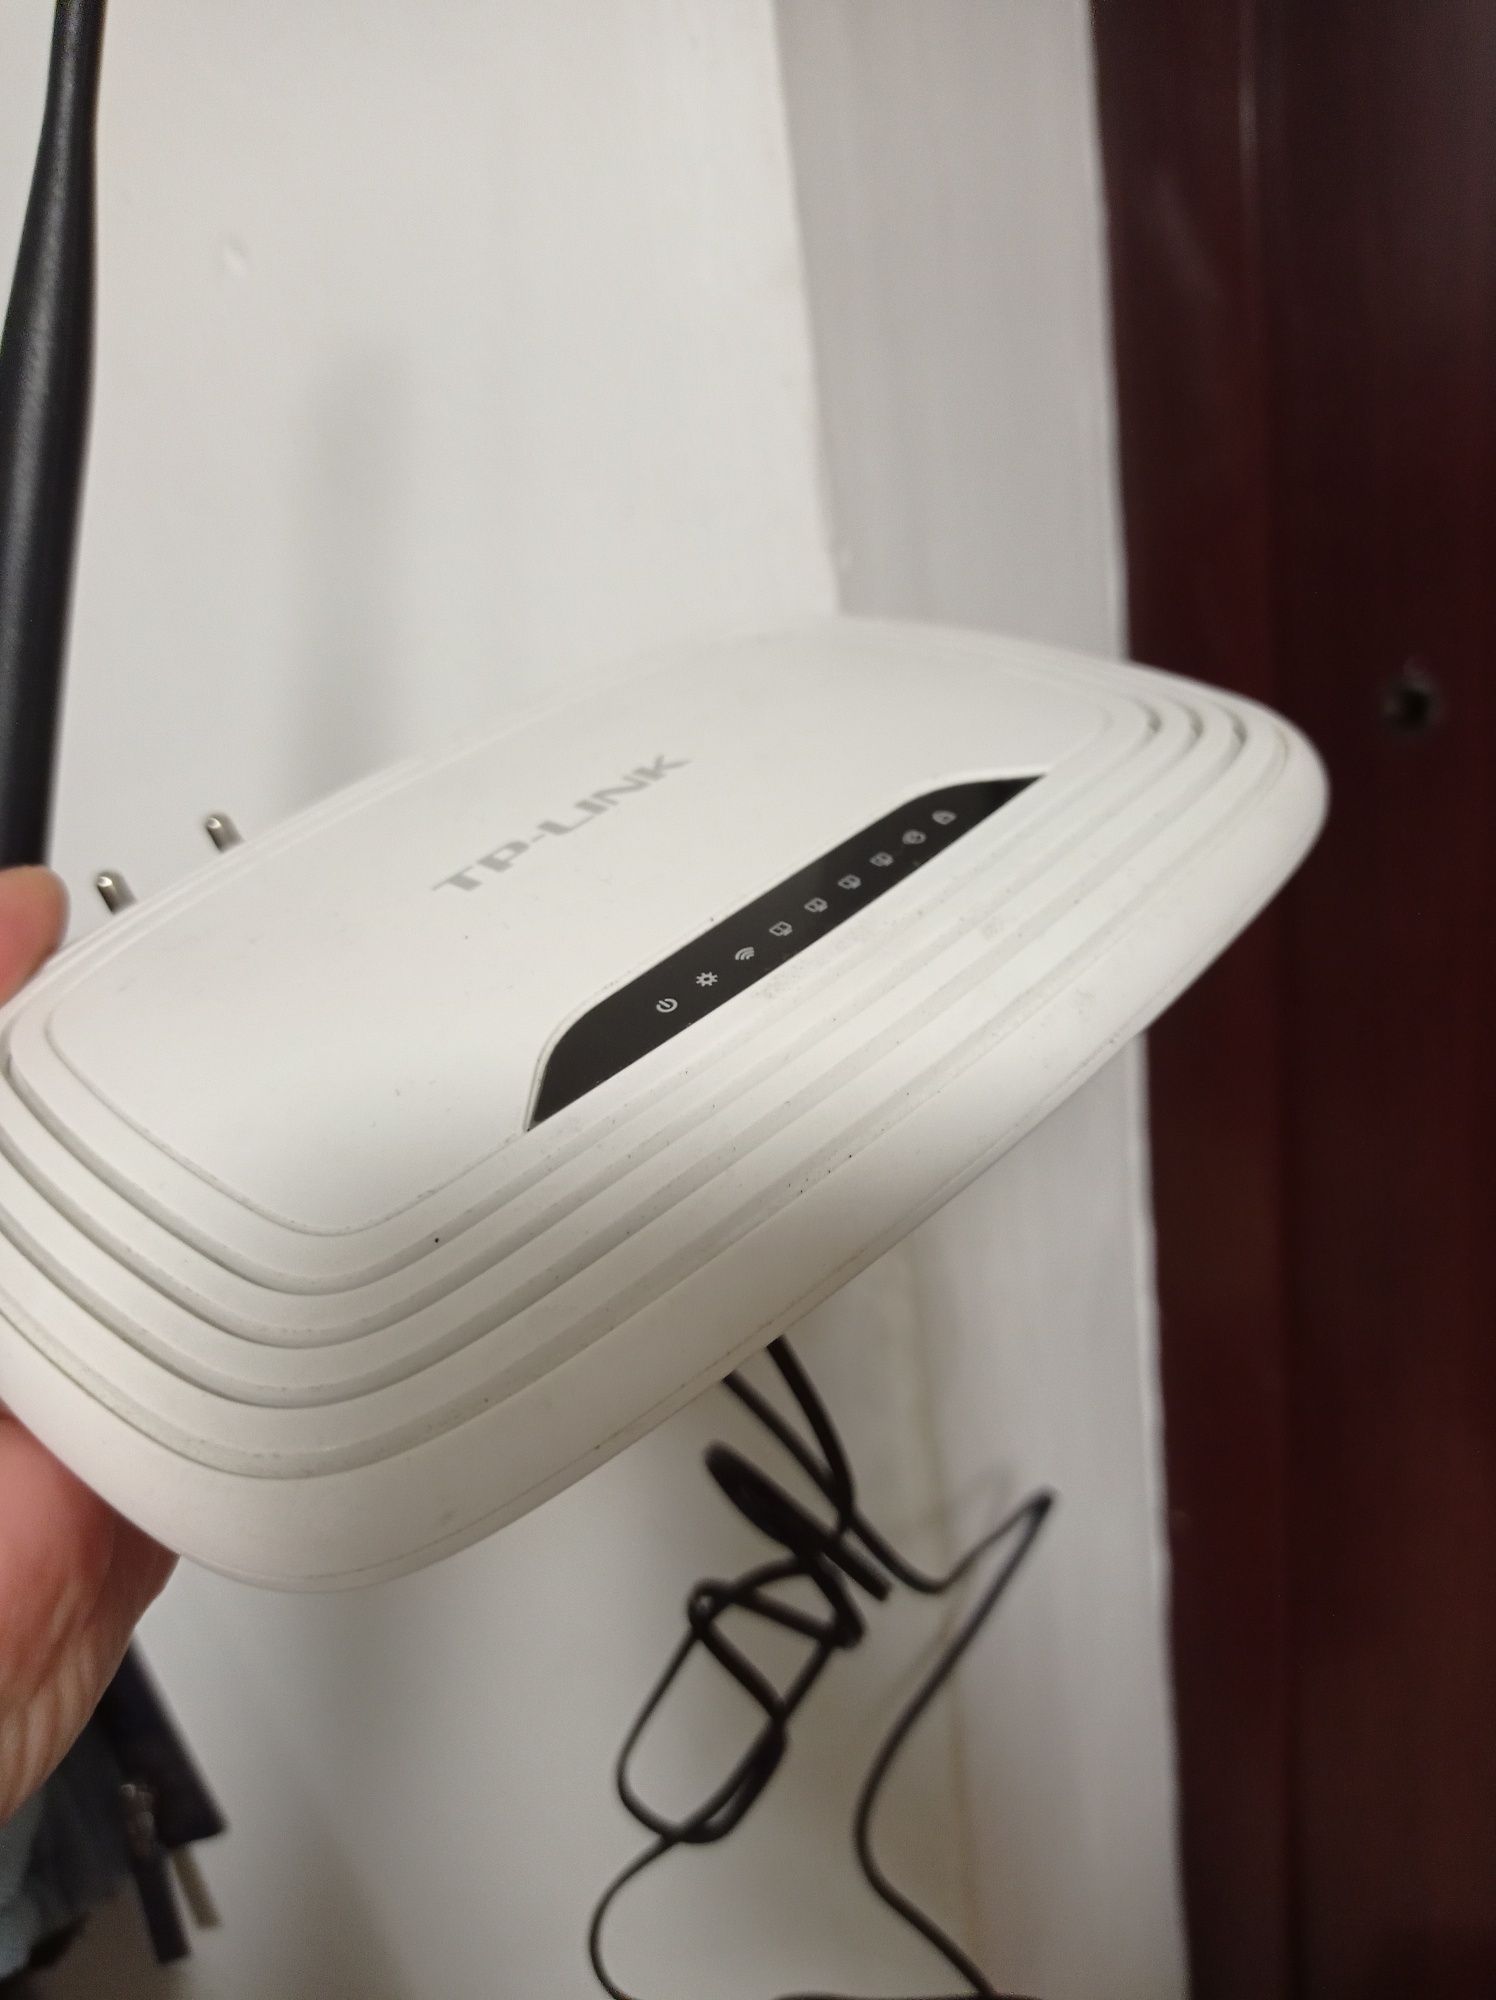 Router роутер маршрутизатор  TP-LINK  TL-WR740N